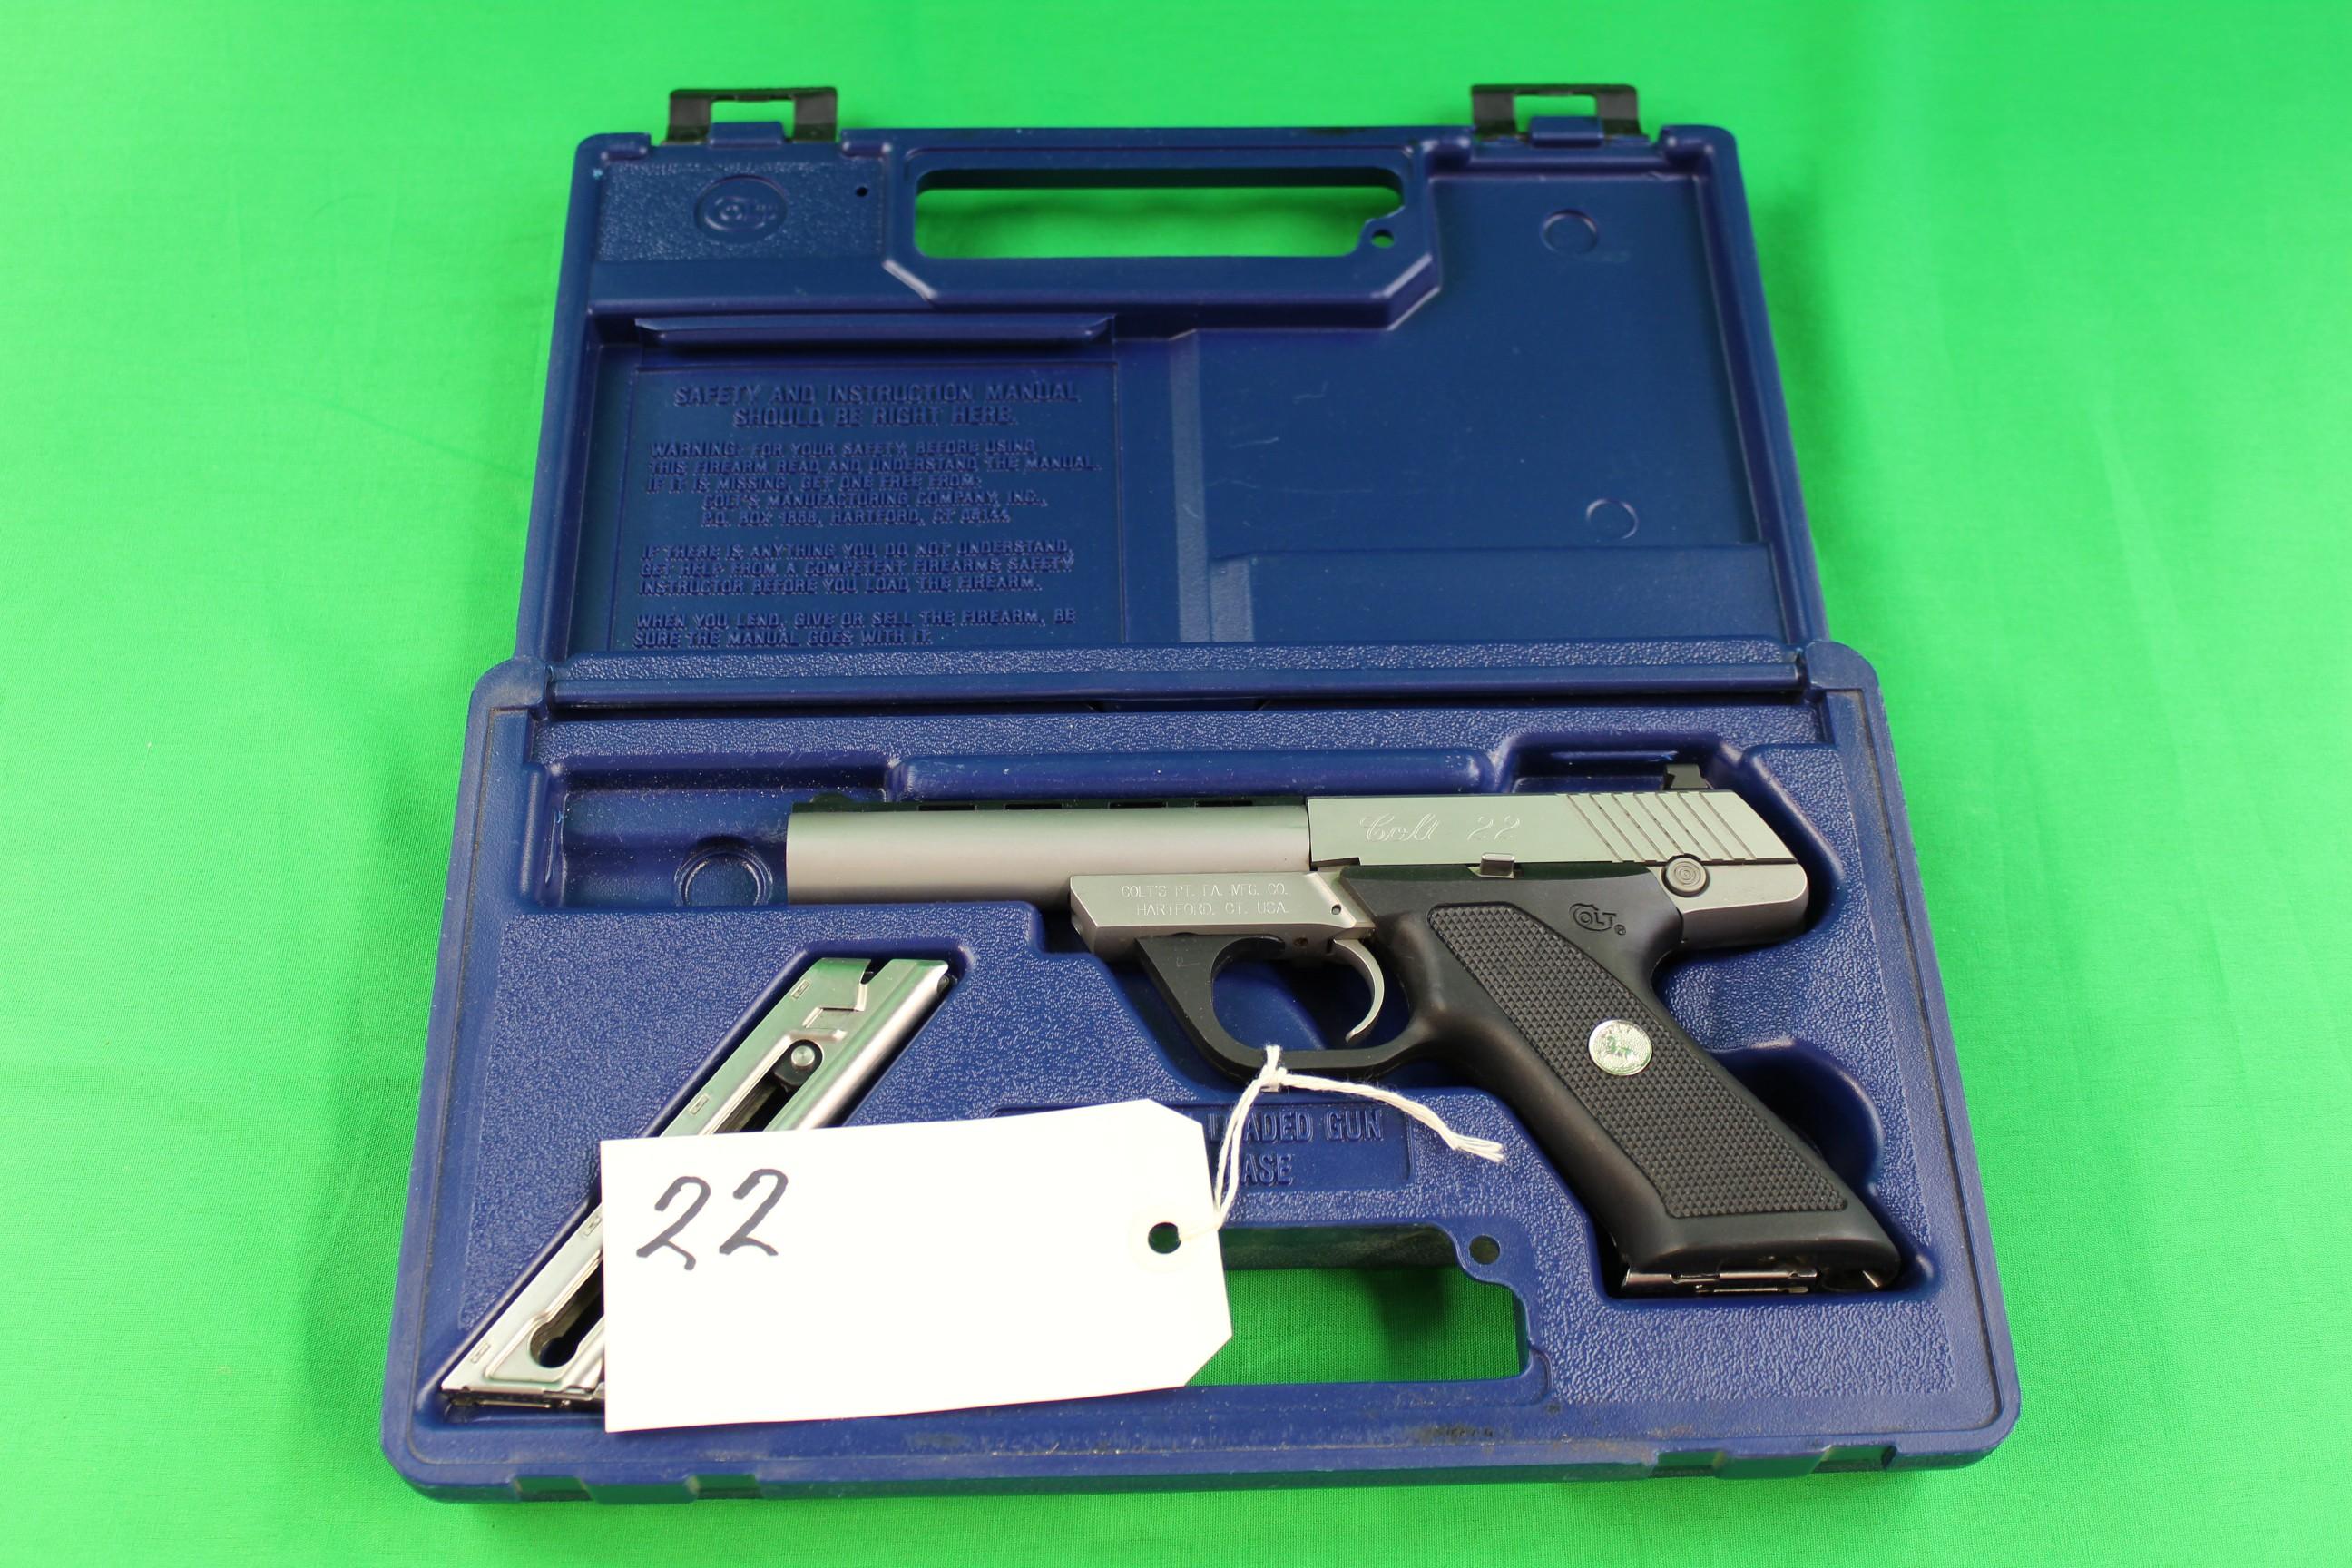 Model Colt .22 Target Pistol, Brushed Stainless Composite Grip, Automatic, s/n PH